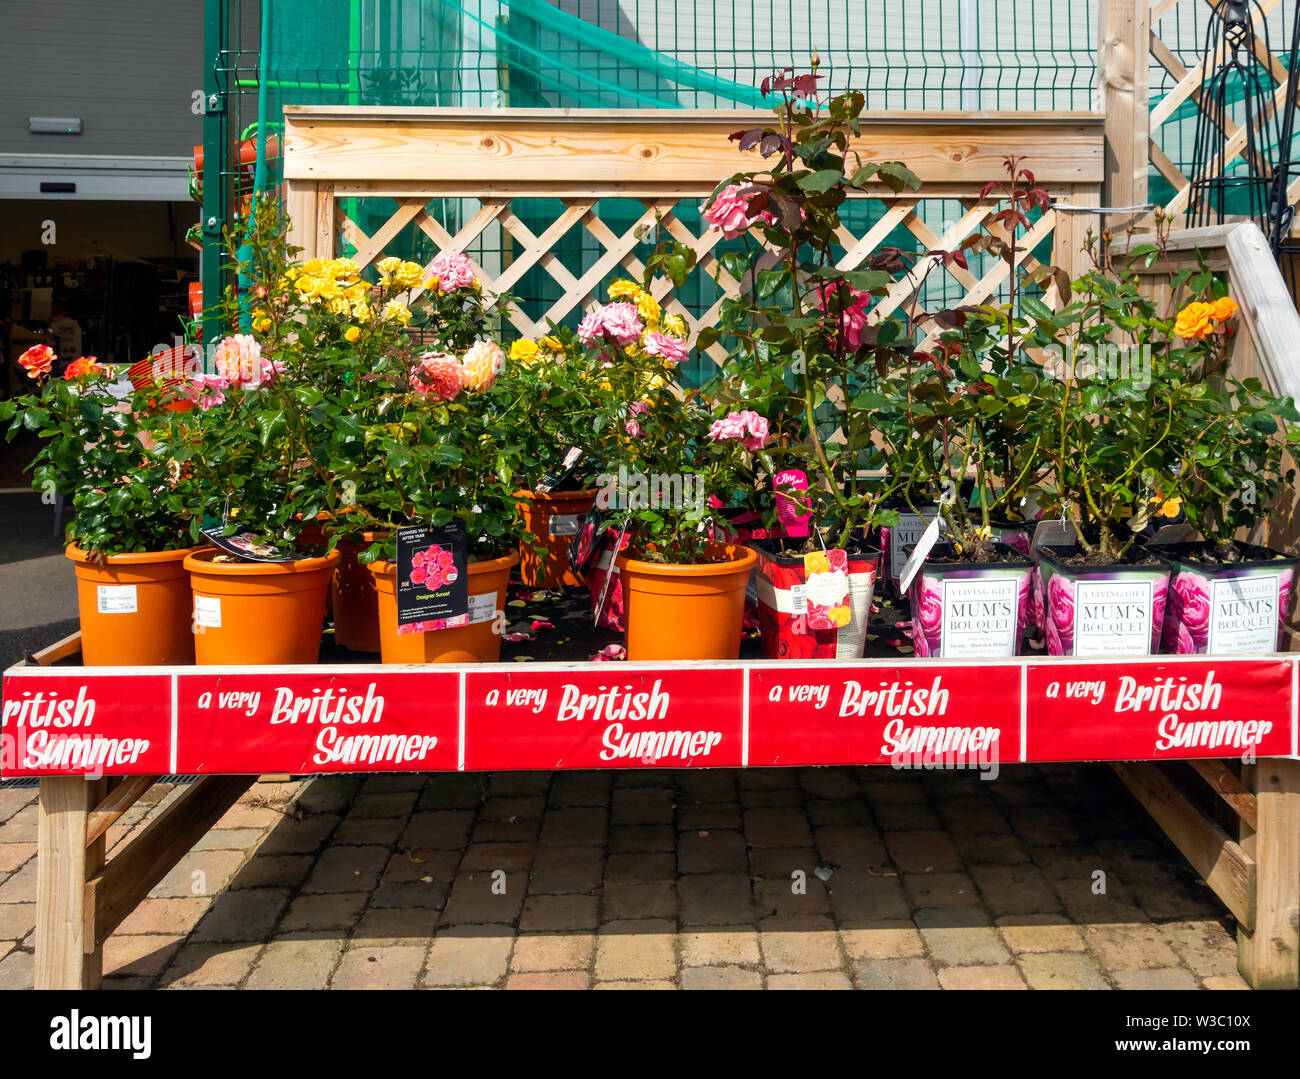 A display of flowering roses for sale in a North Yorkshire Garden Centre promoted as - a very British Summer Stock Photo